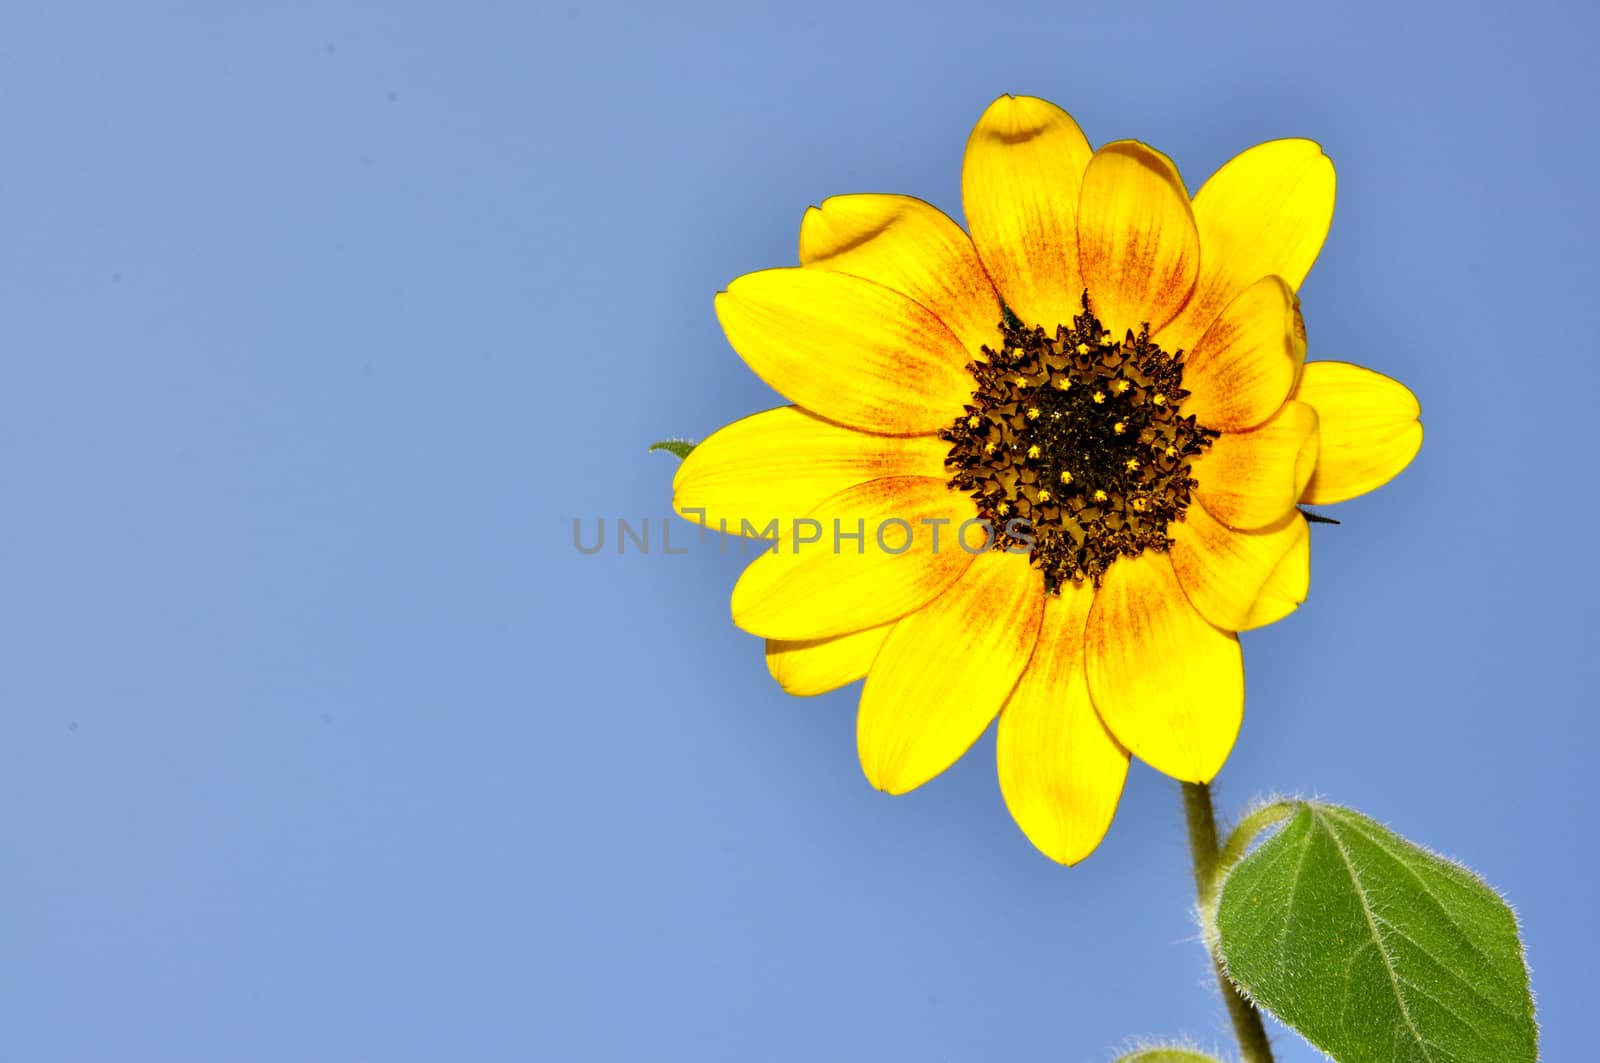 Sunflowers, blooming sunflower on a background blue sky.